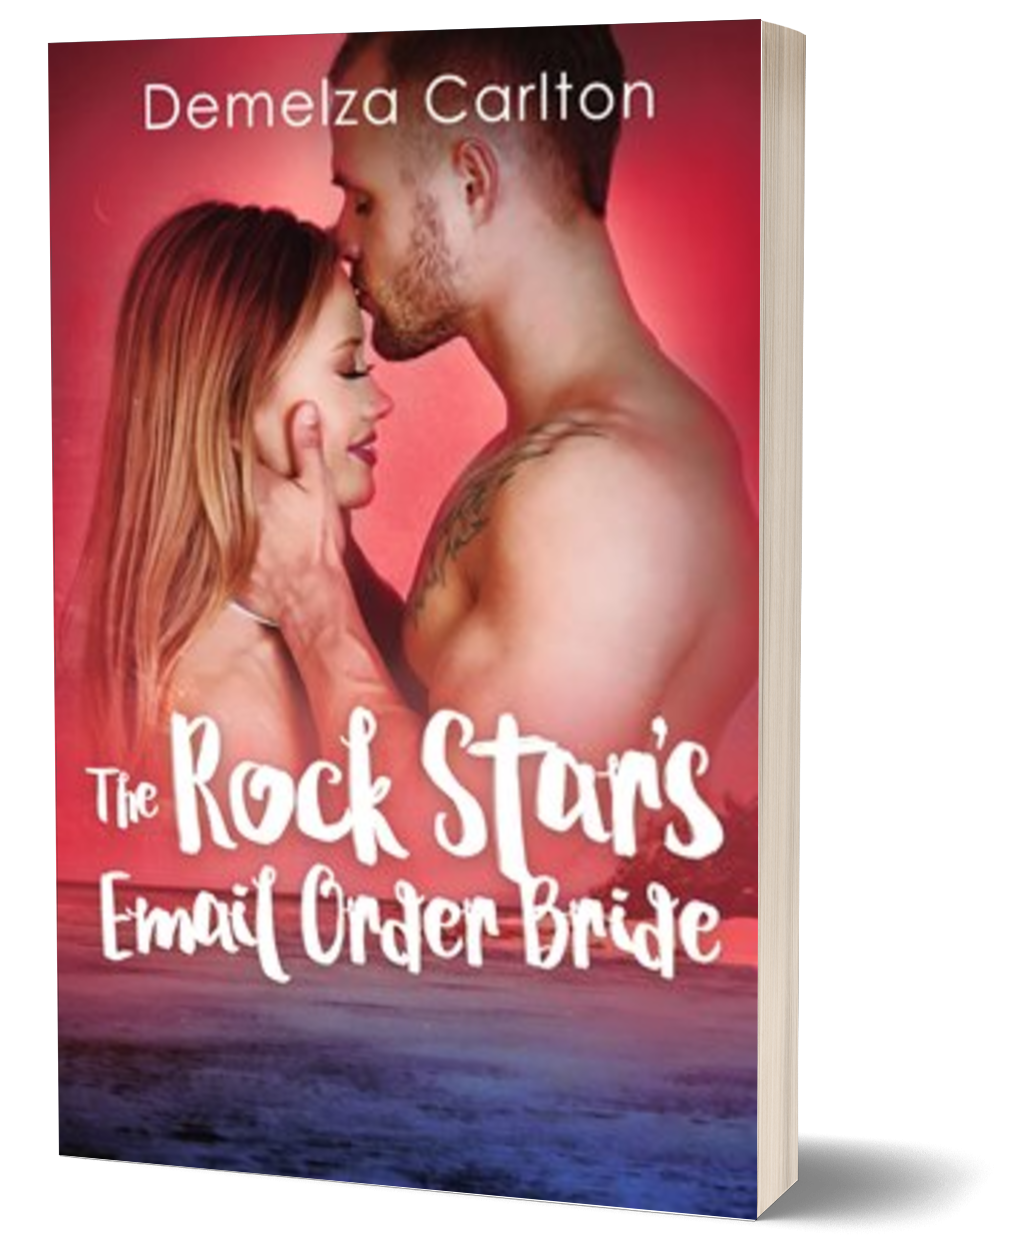 The Rock Star's Email Order Bride (Book 2 in the Romance Island Resort series) PAPERBACK